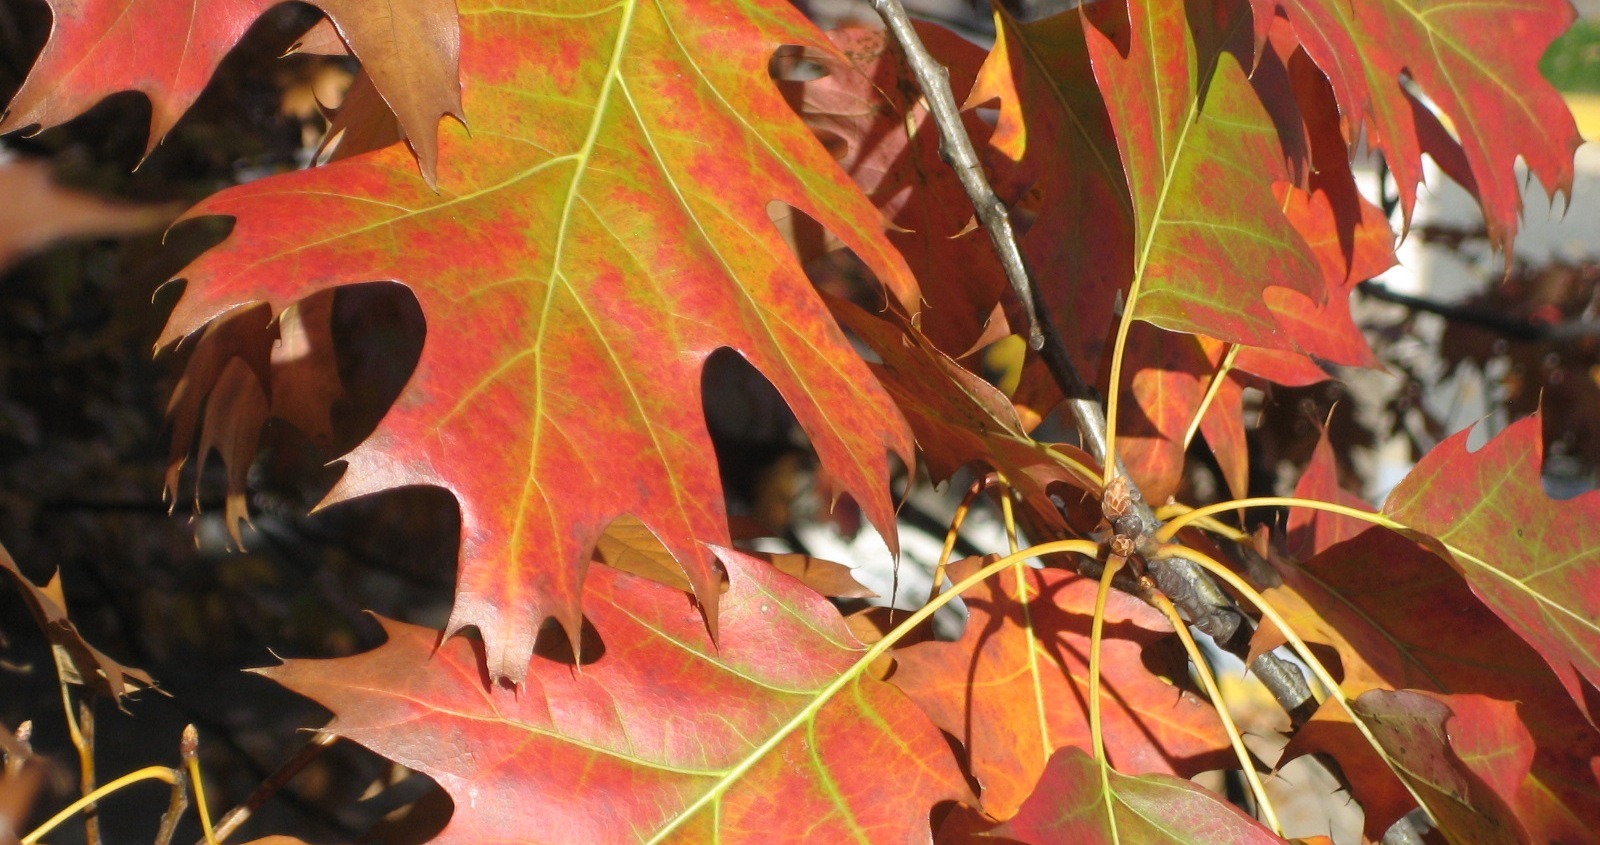 Image of leaves changing color.